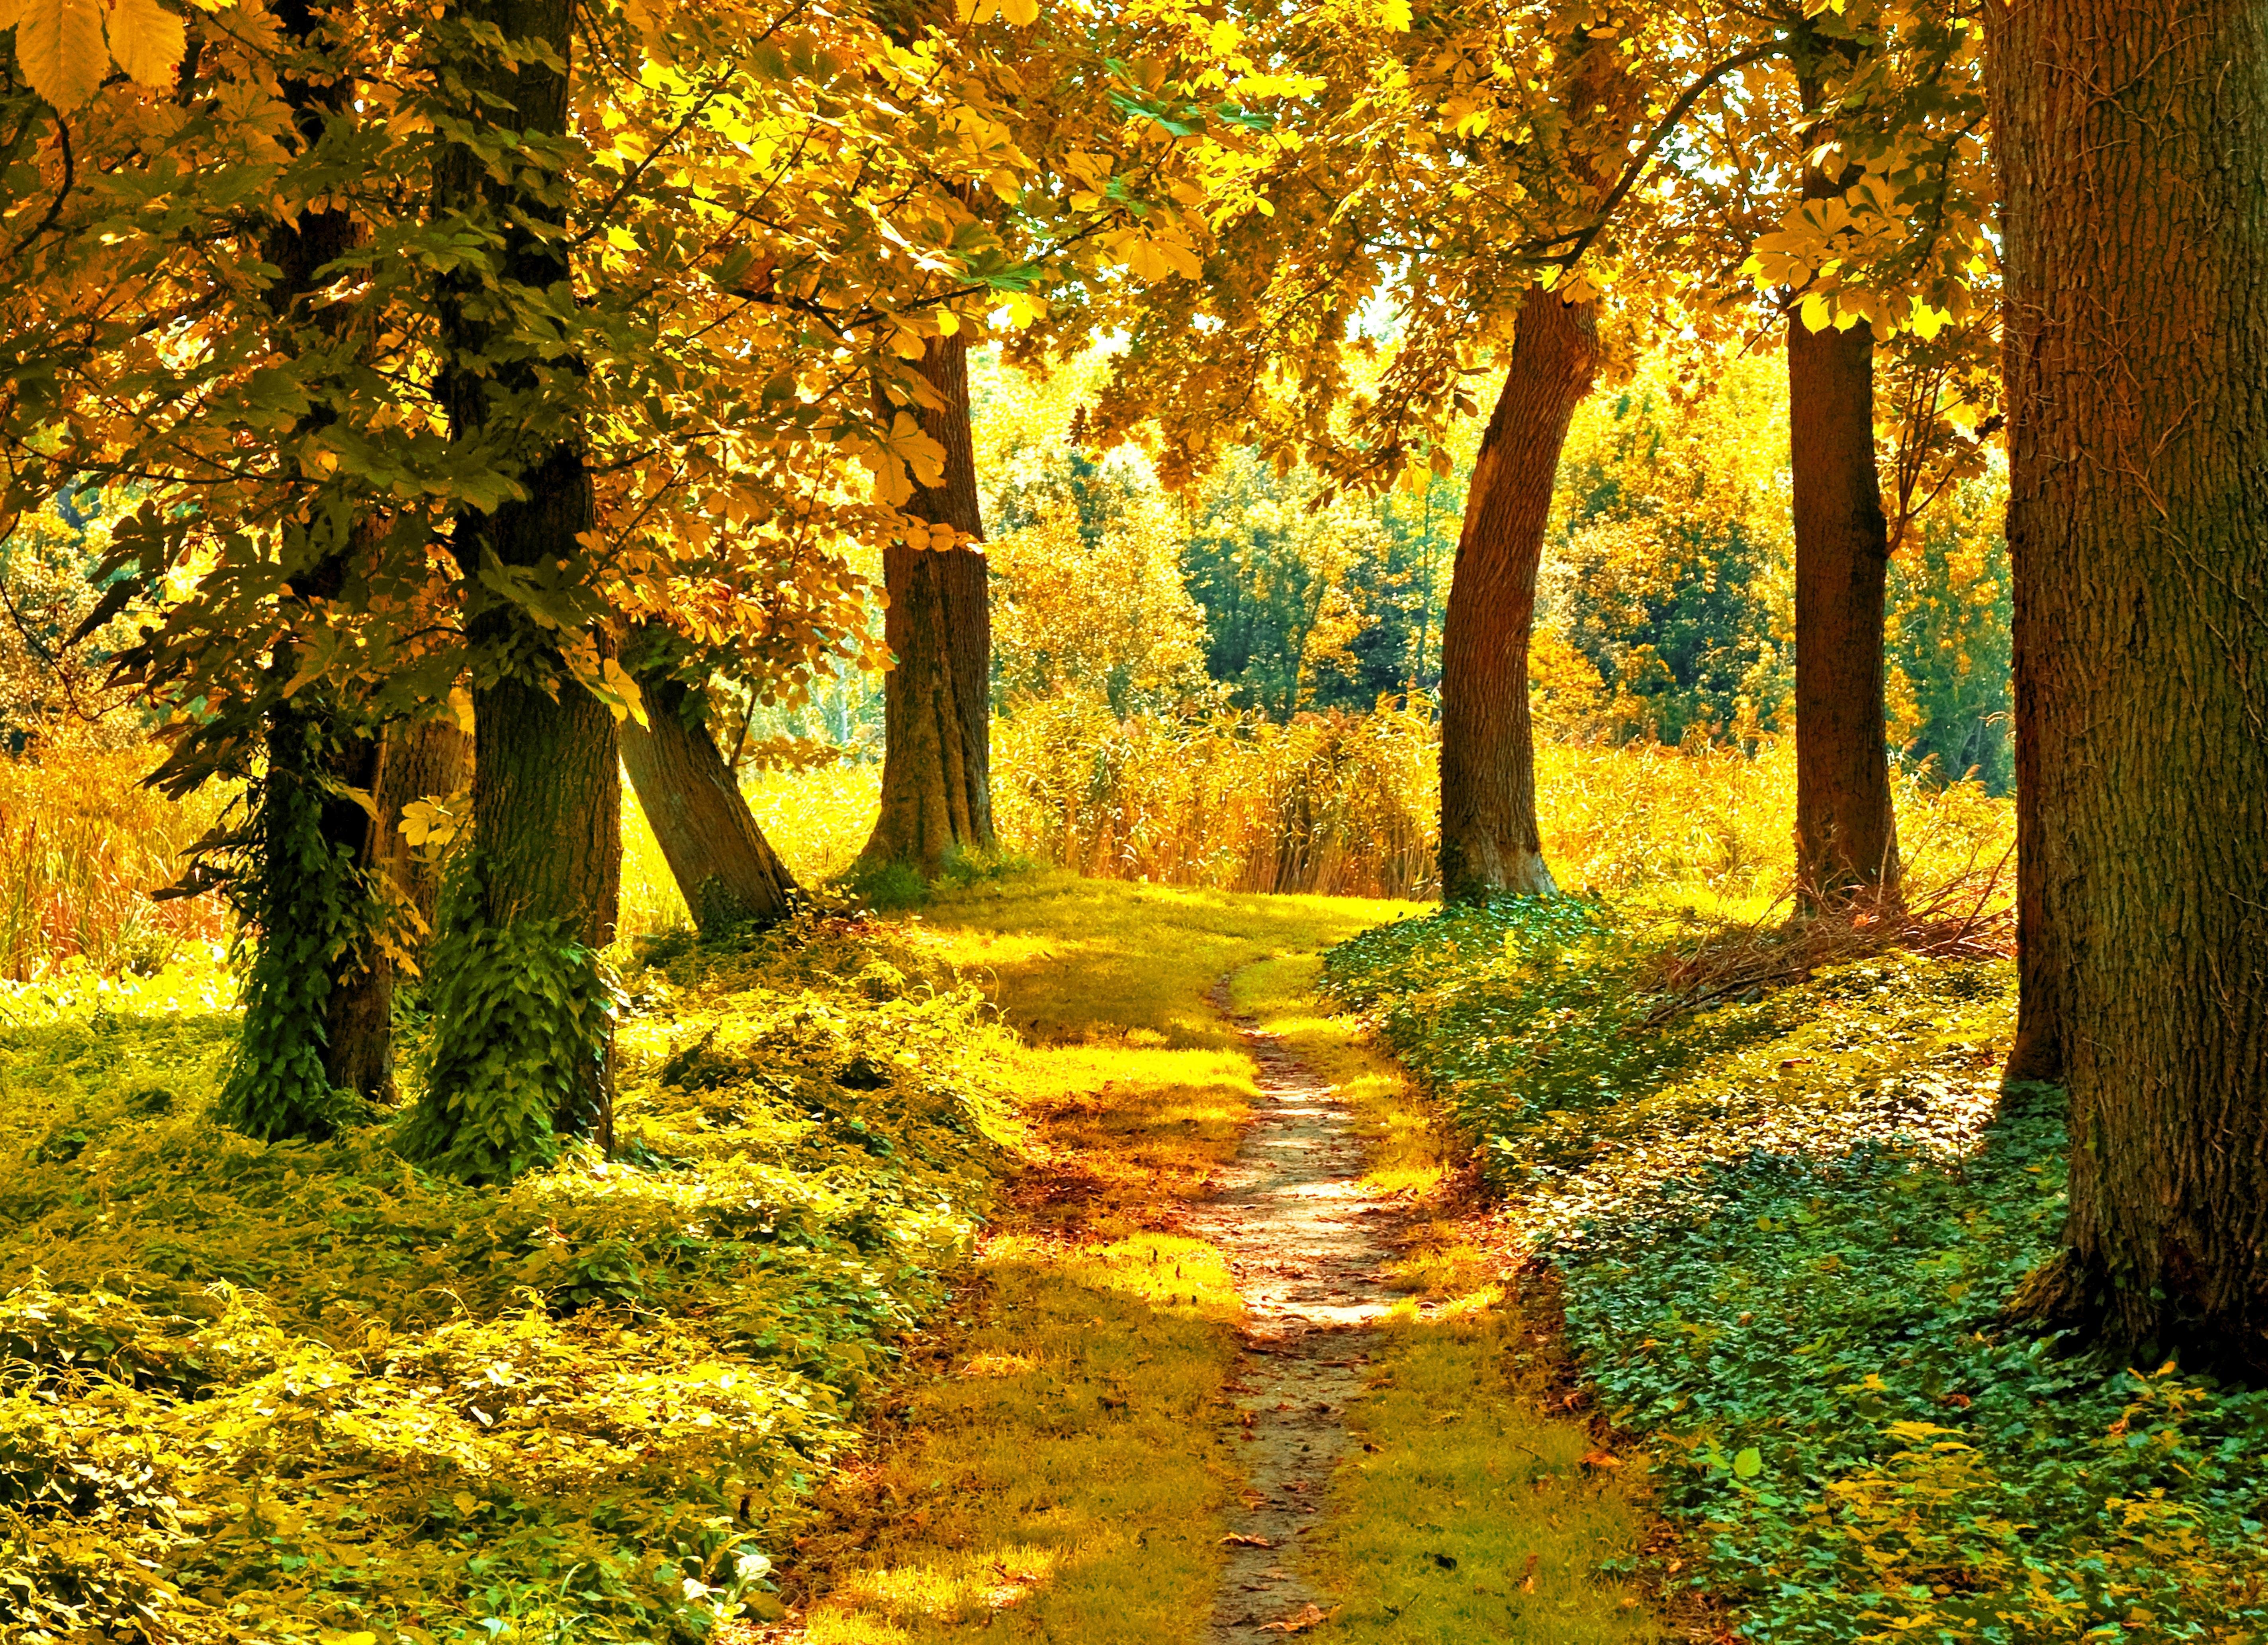 Autumn Sunny day wallpaper and image